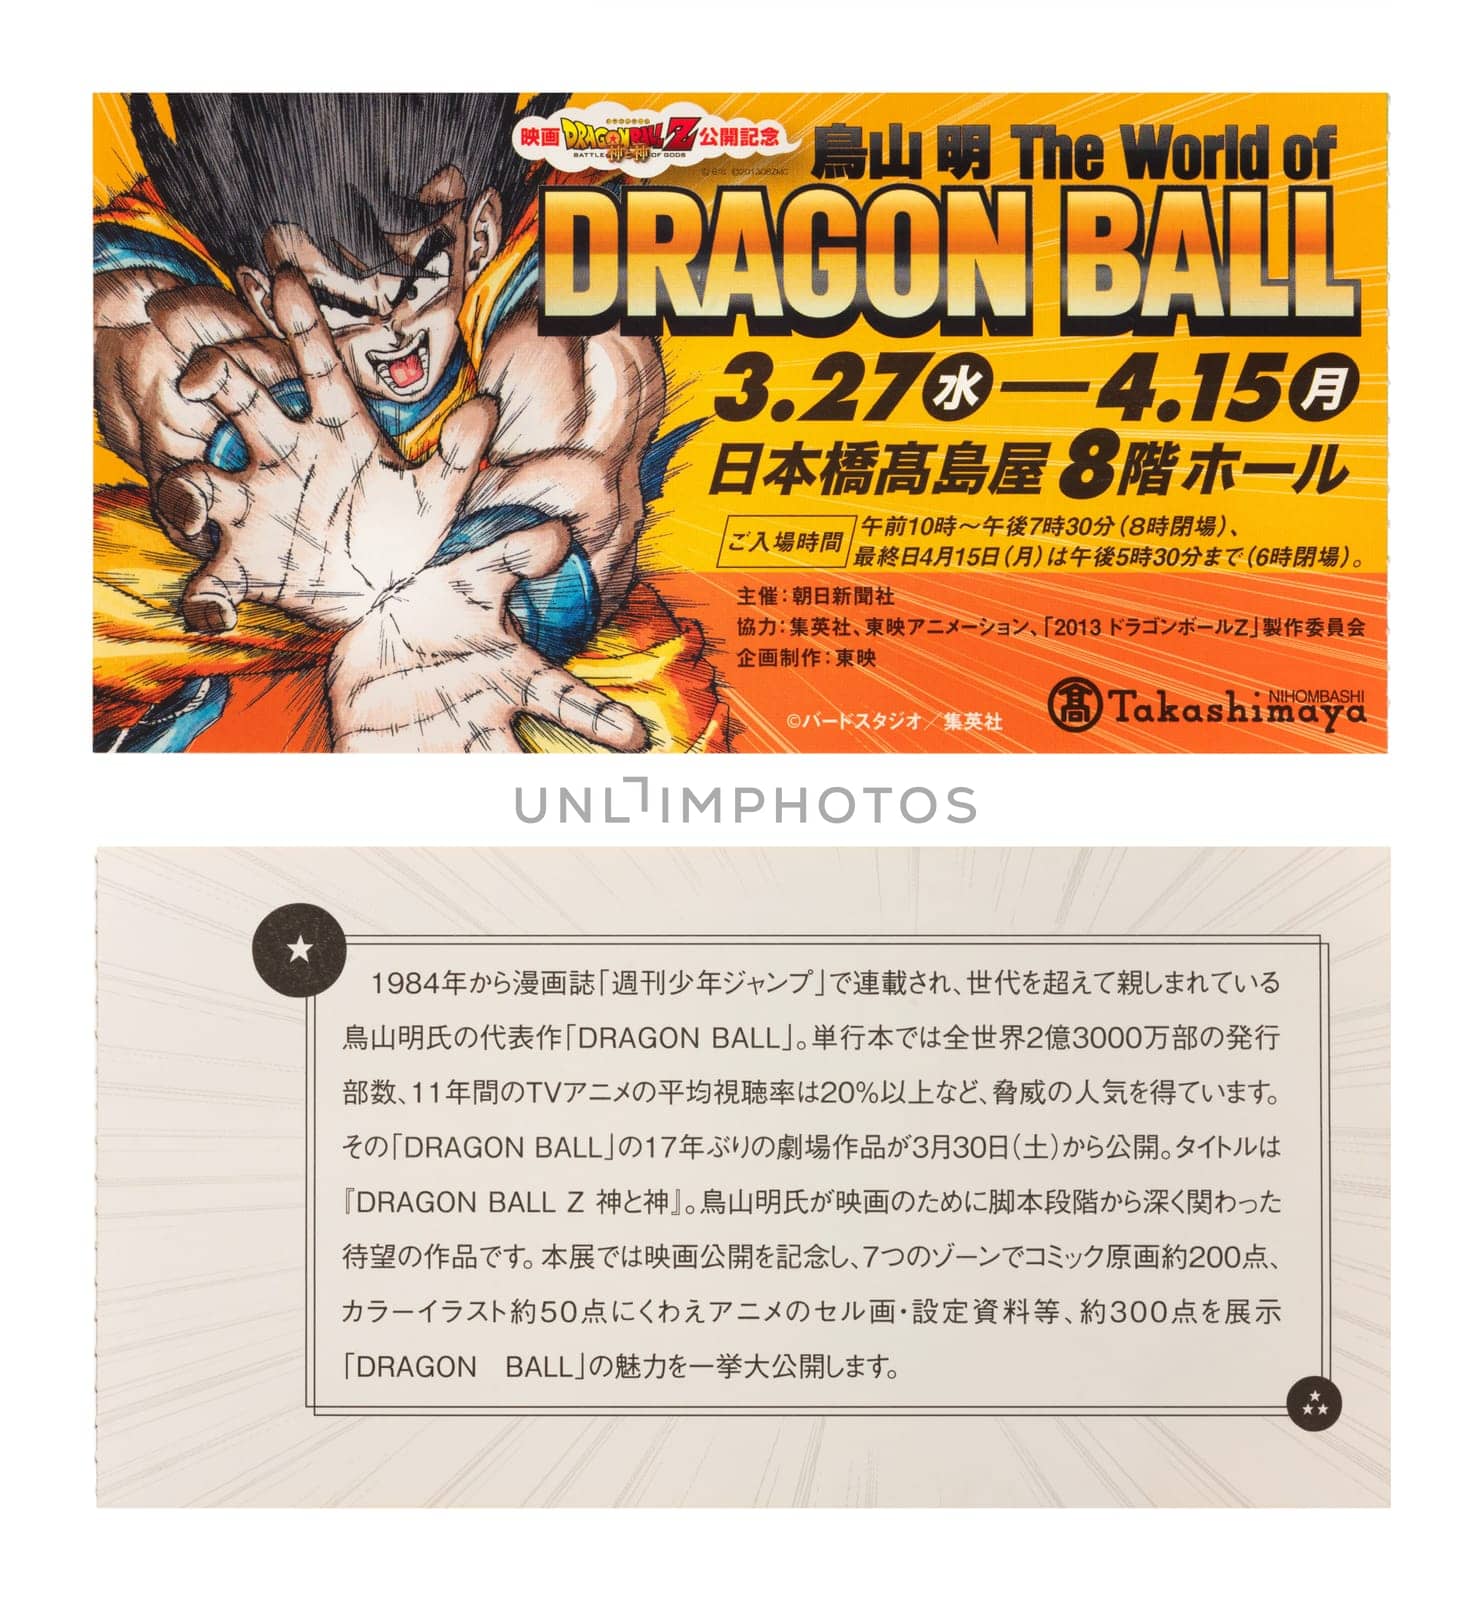 tokyo, japan - mar 27 2013: Ticket isolated on a white background of the exhibition "Akira Toriyama The World of DRAGONBALL" celebrating the anime film "Dragon Ball Z: Battle of Gods". (left: front)